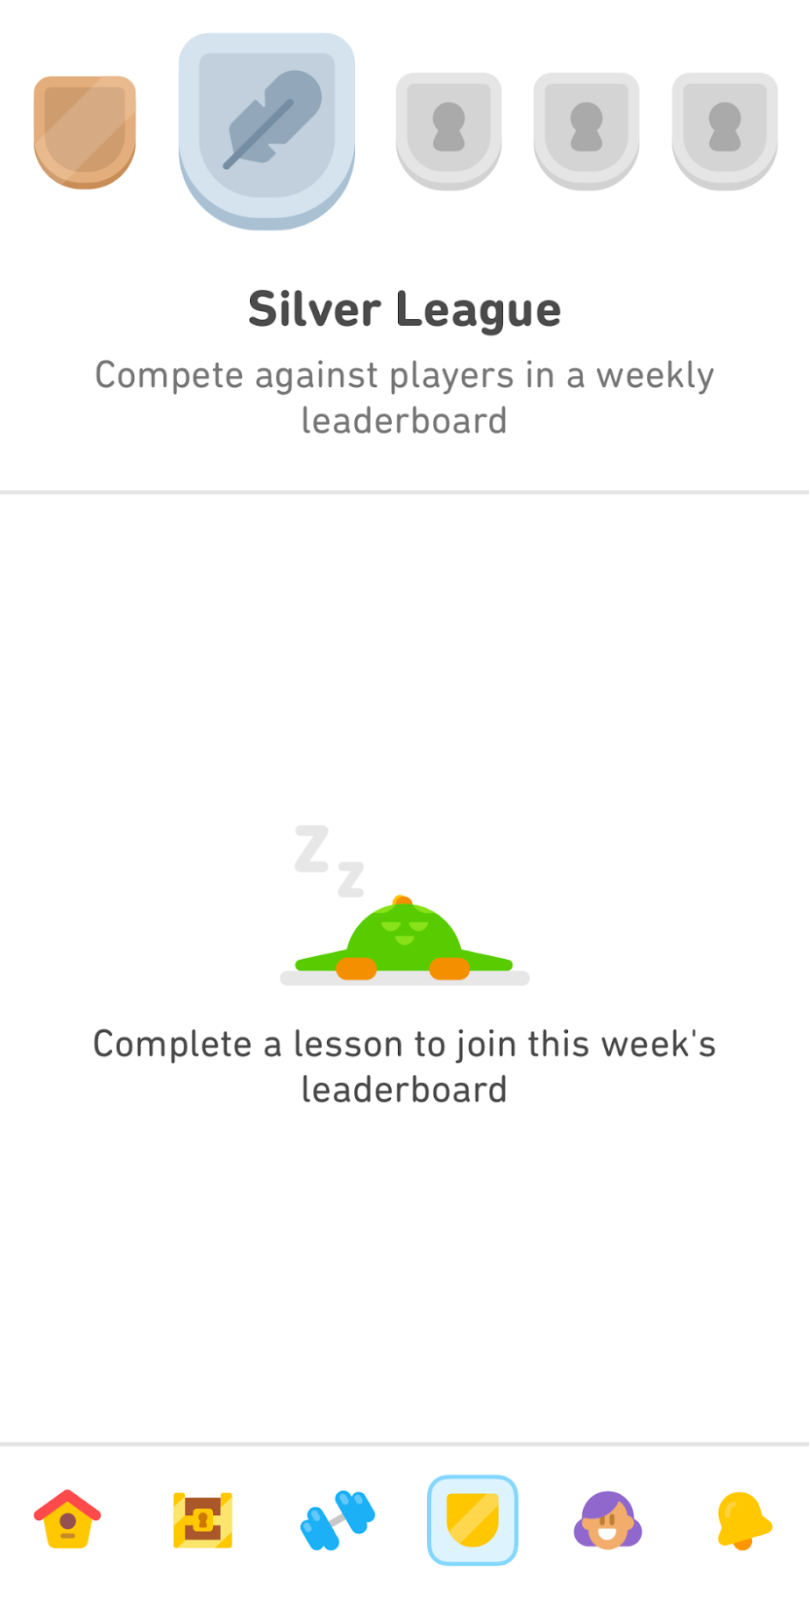 Duolingo's silver league section, inviting users to compete against players in a weekly leaderboard